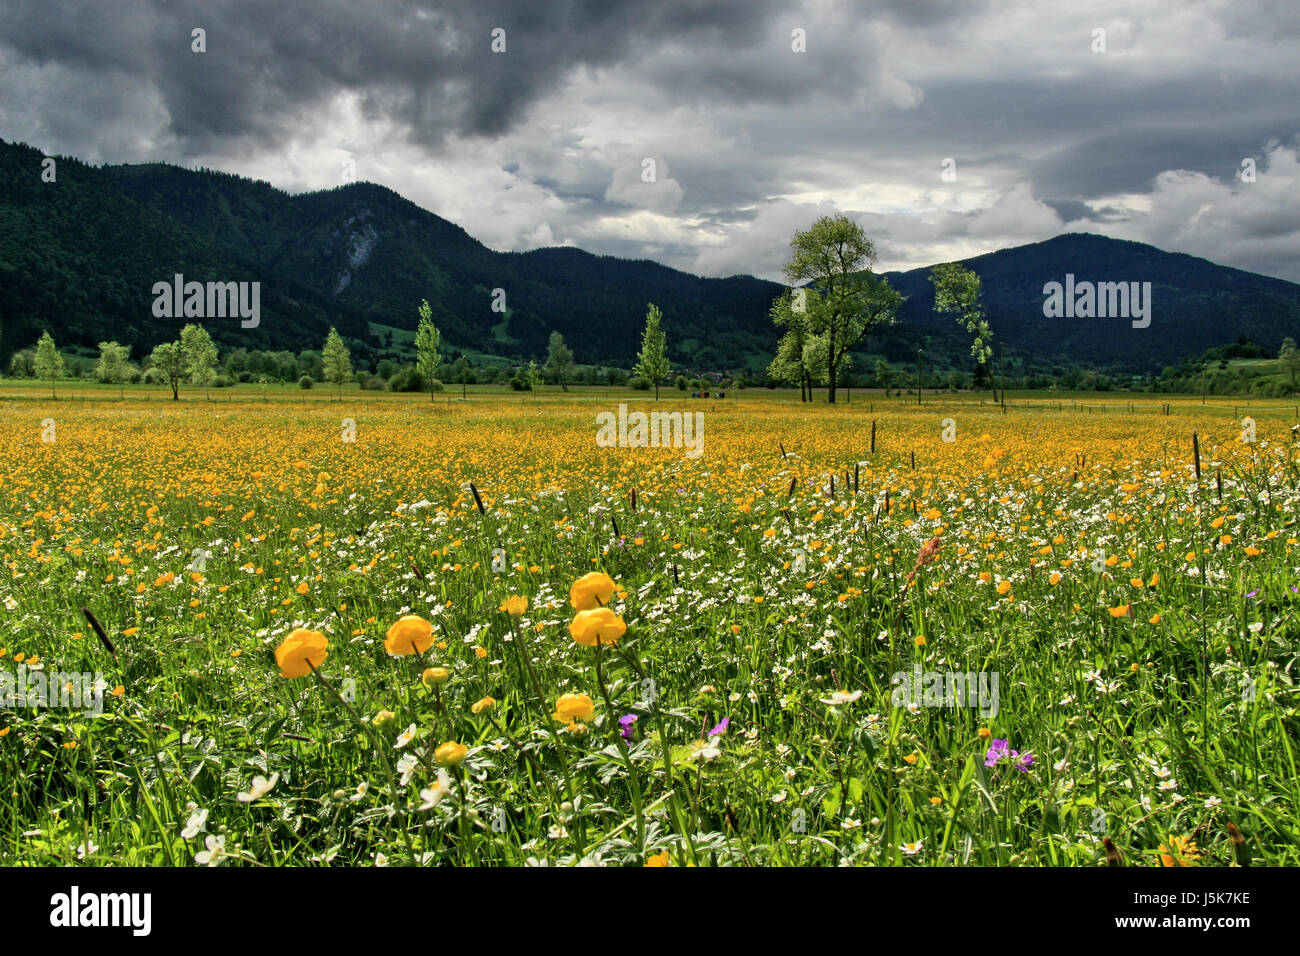 protected sheltered tree trees hill mountains plant green leaves alps flower Stock Photo